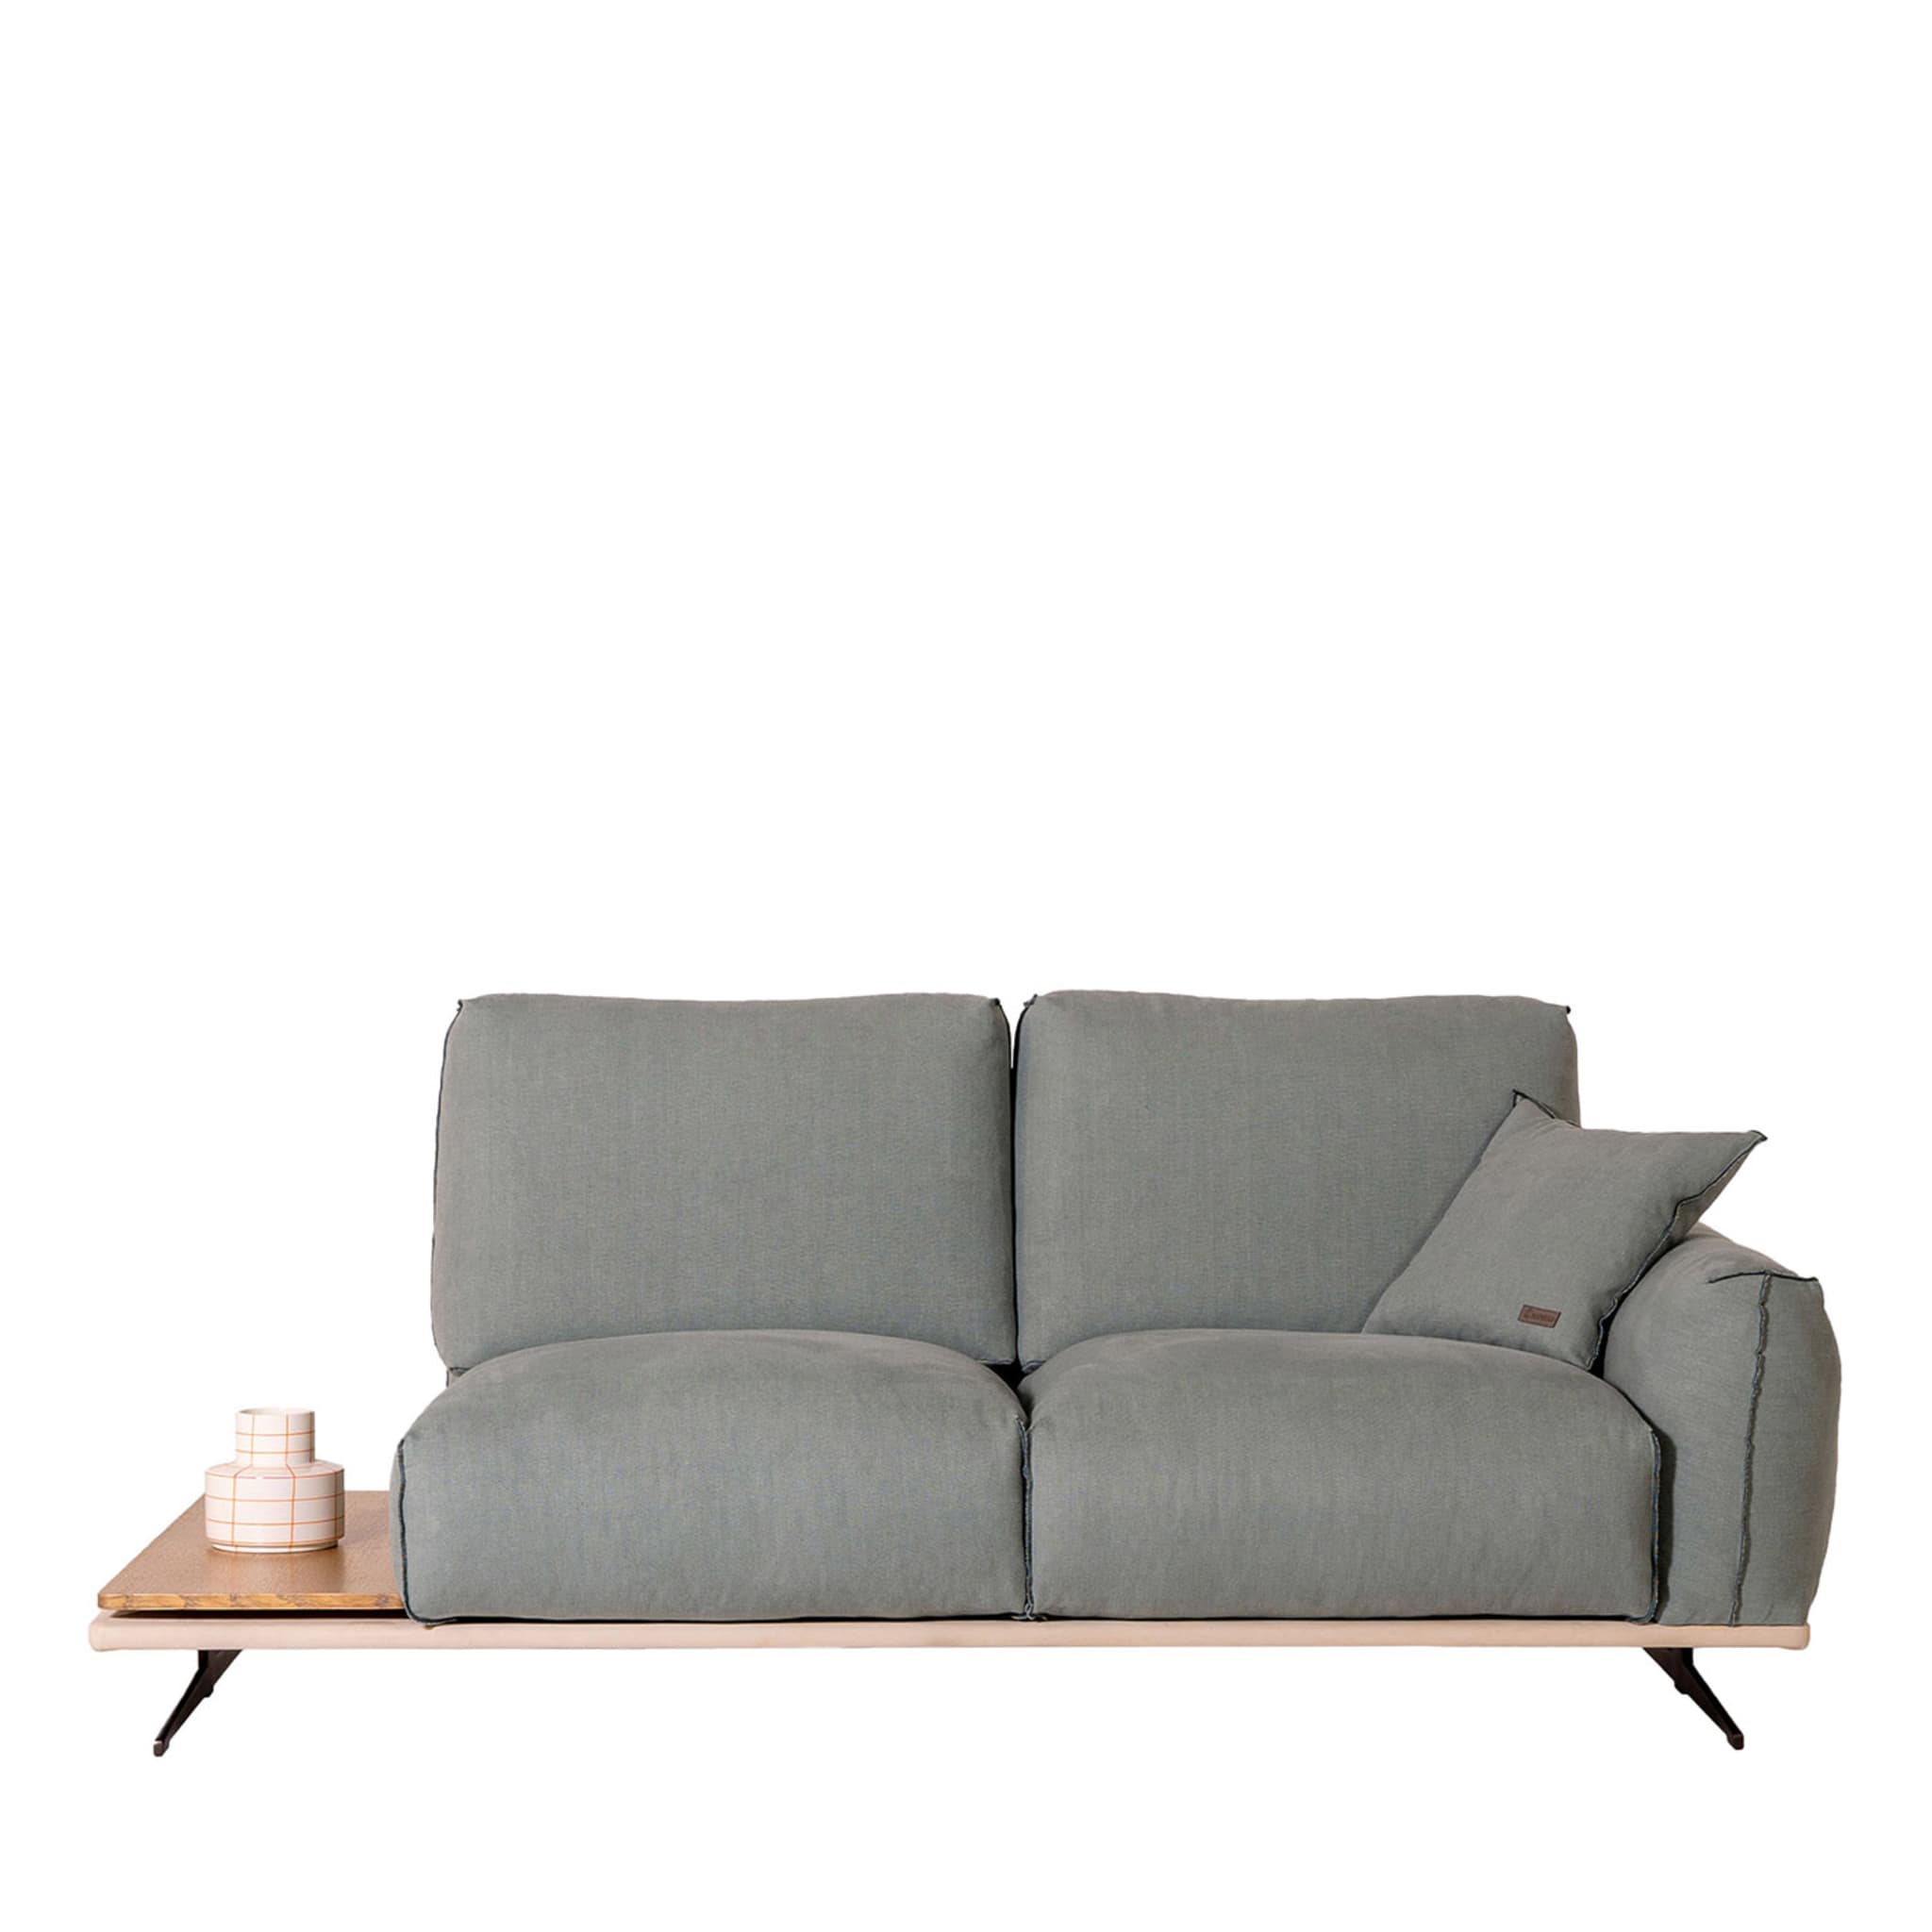 Boboli Sofa with Side Table by Marco and Giulio Mantellassi - Main view